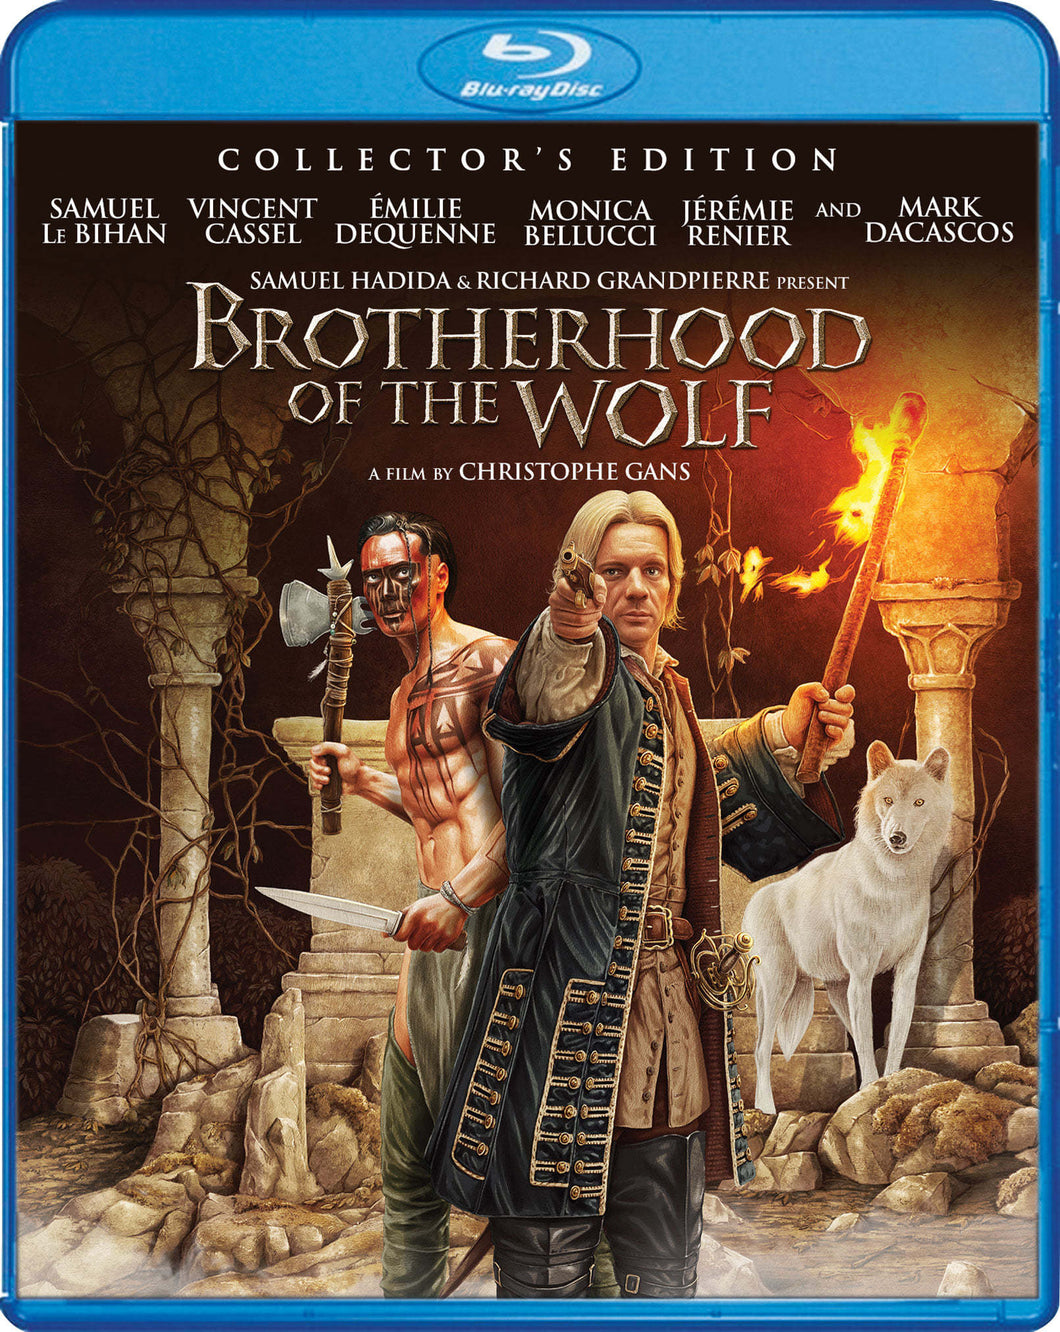 Brotherhood of the Wolf (2001) de Christophe Gans - front cover